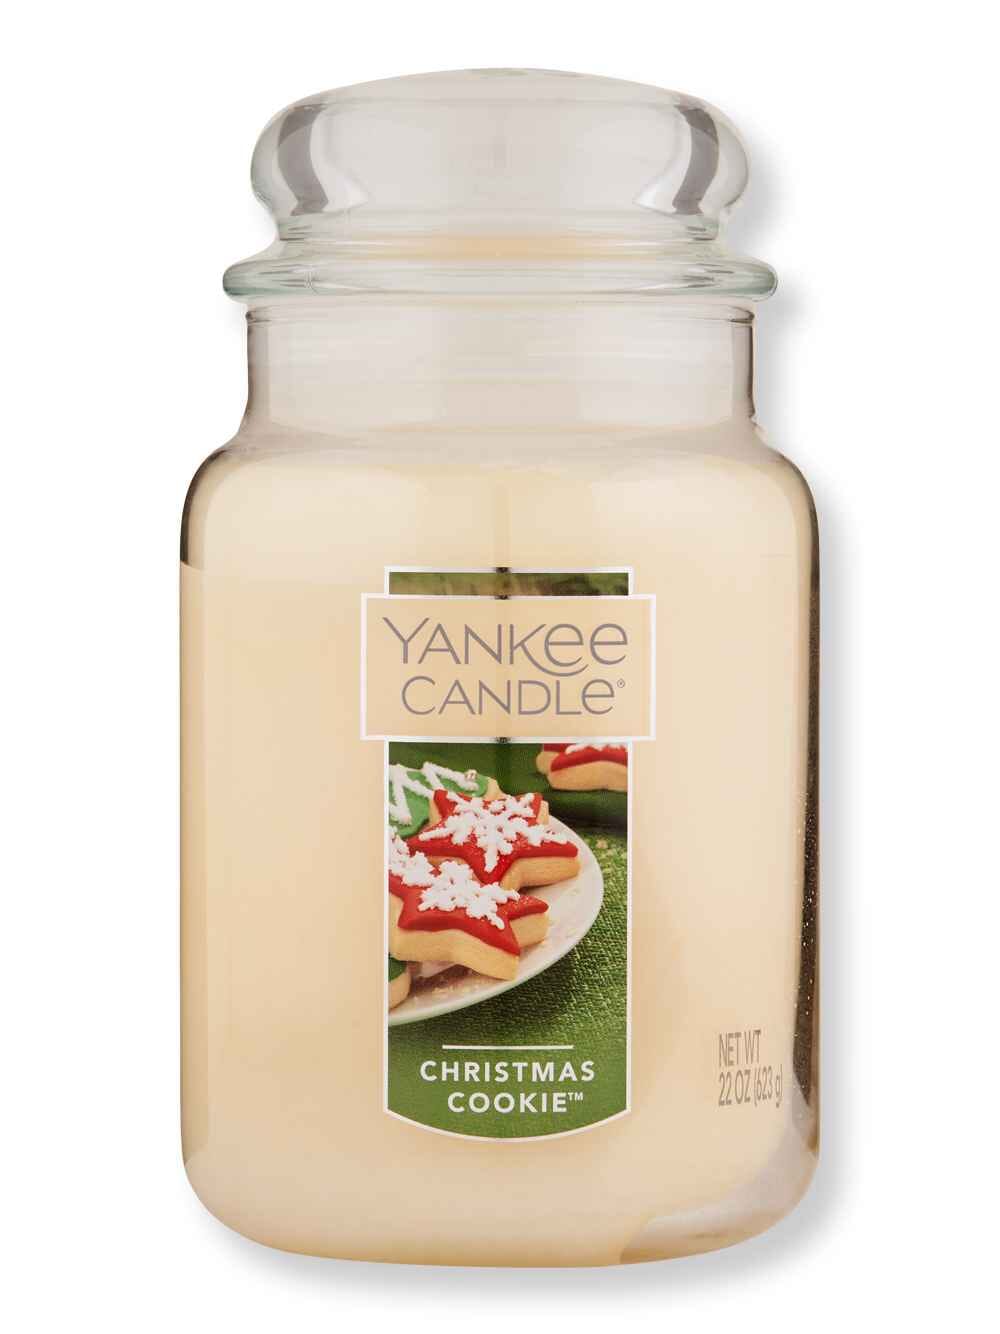 Yankee Candle Clean Cotton - Original Large Jar Scented Candle 